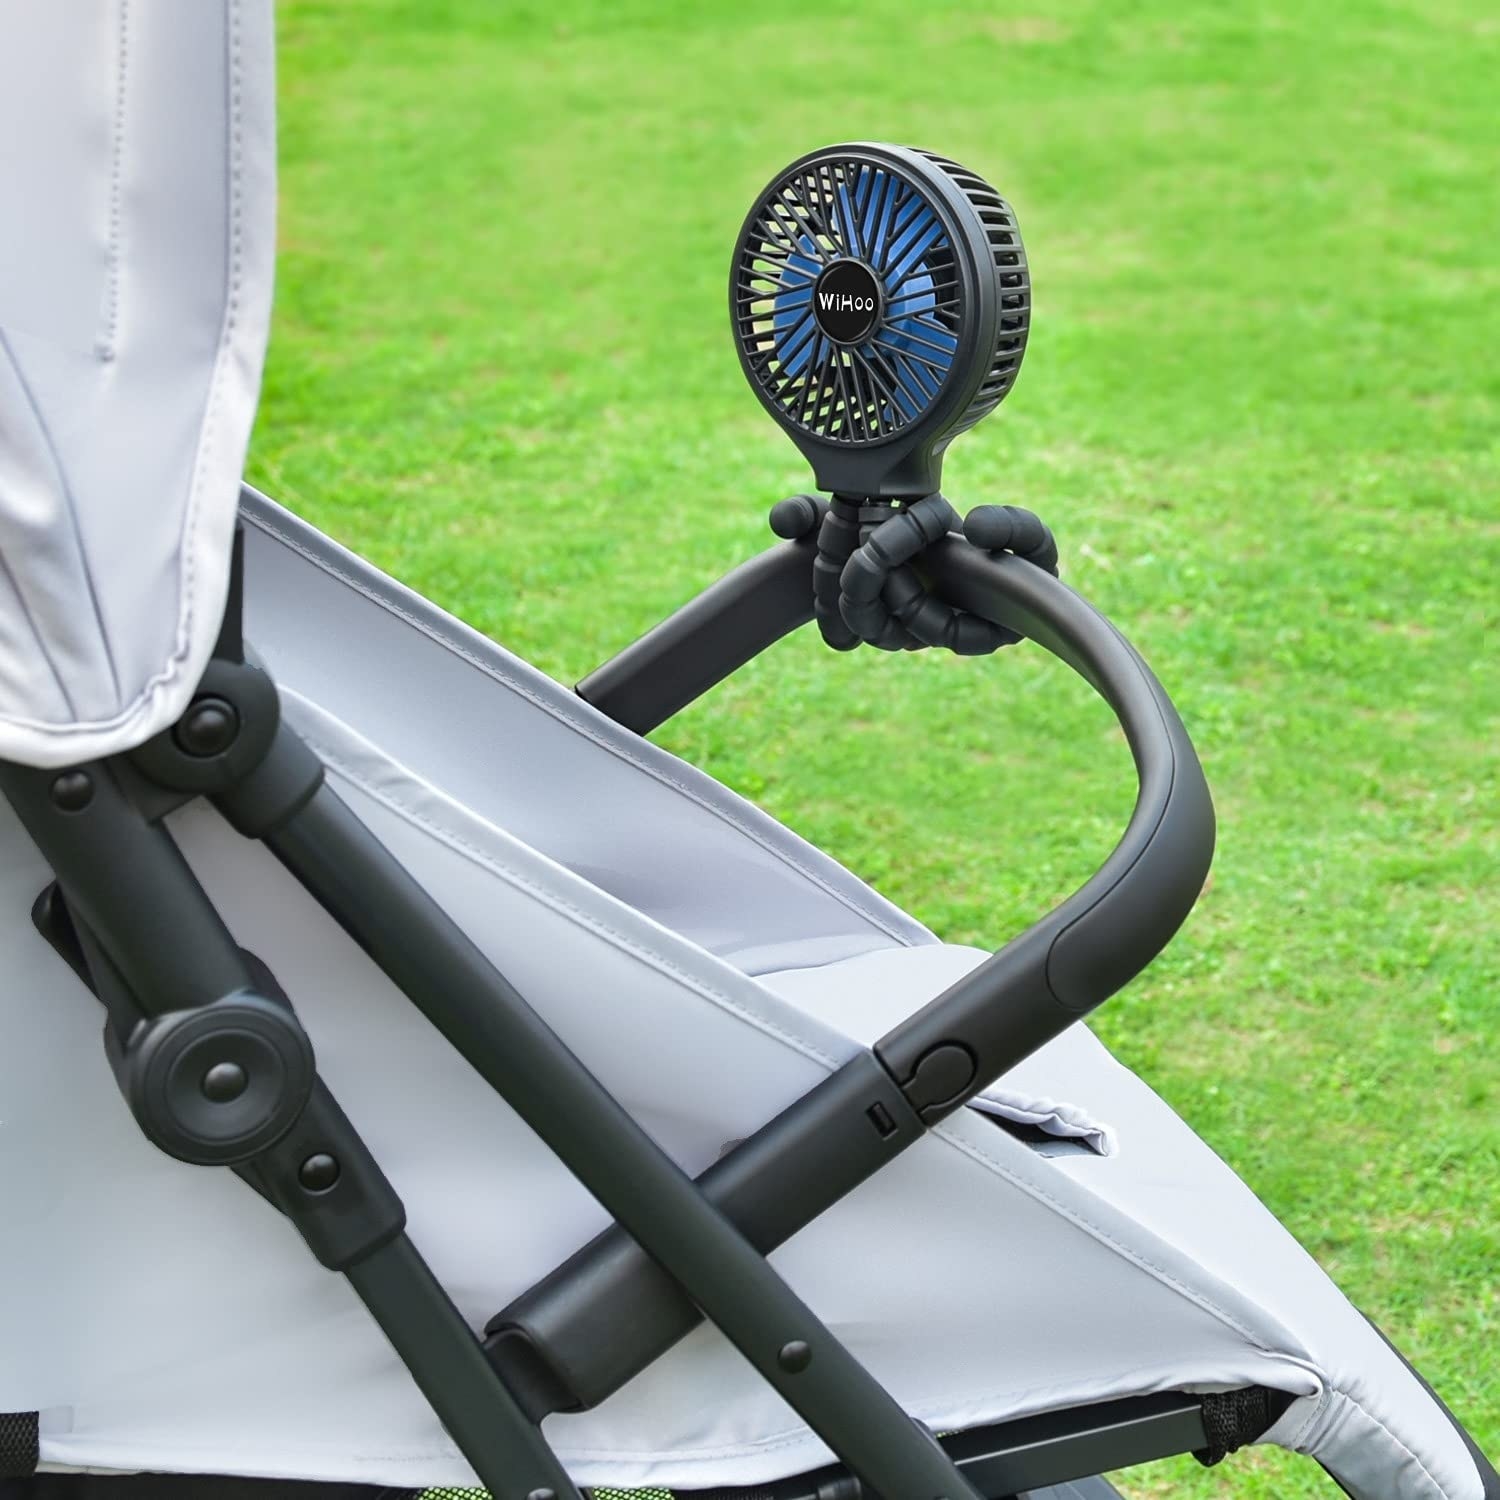 the black fan wrapped around the handle of a stroller